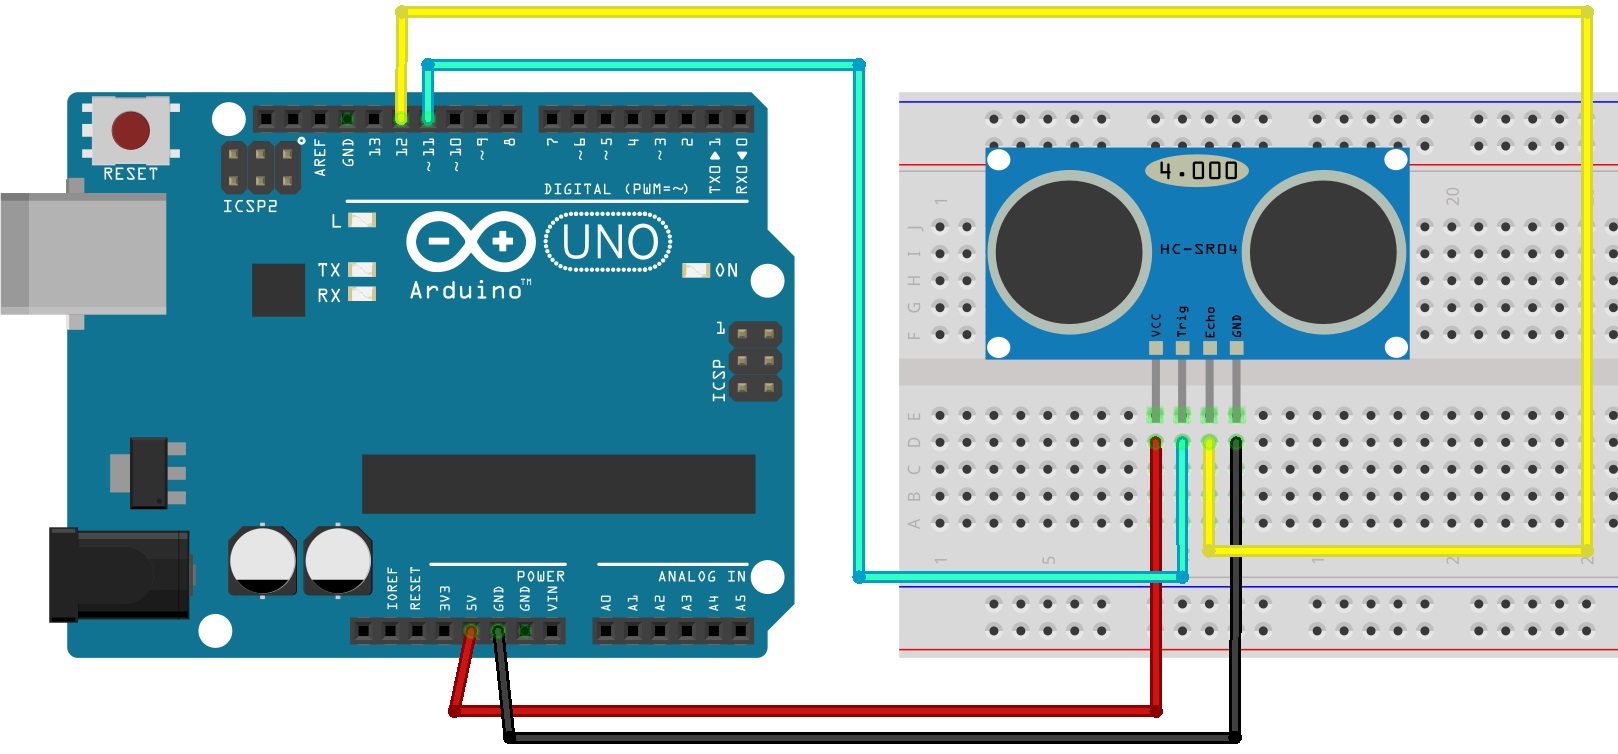 schematic diagram to wire the HC-SR04 ultrasonic sensor to the Arduino